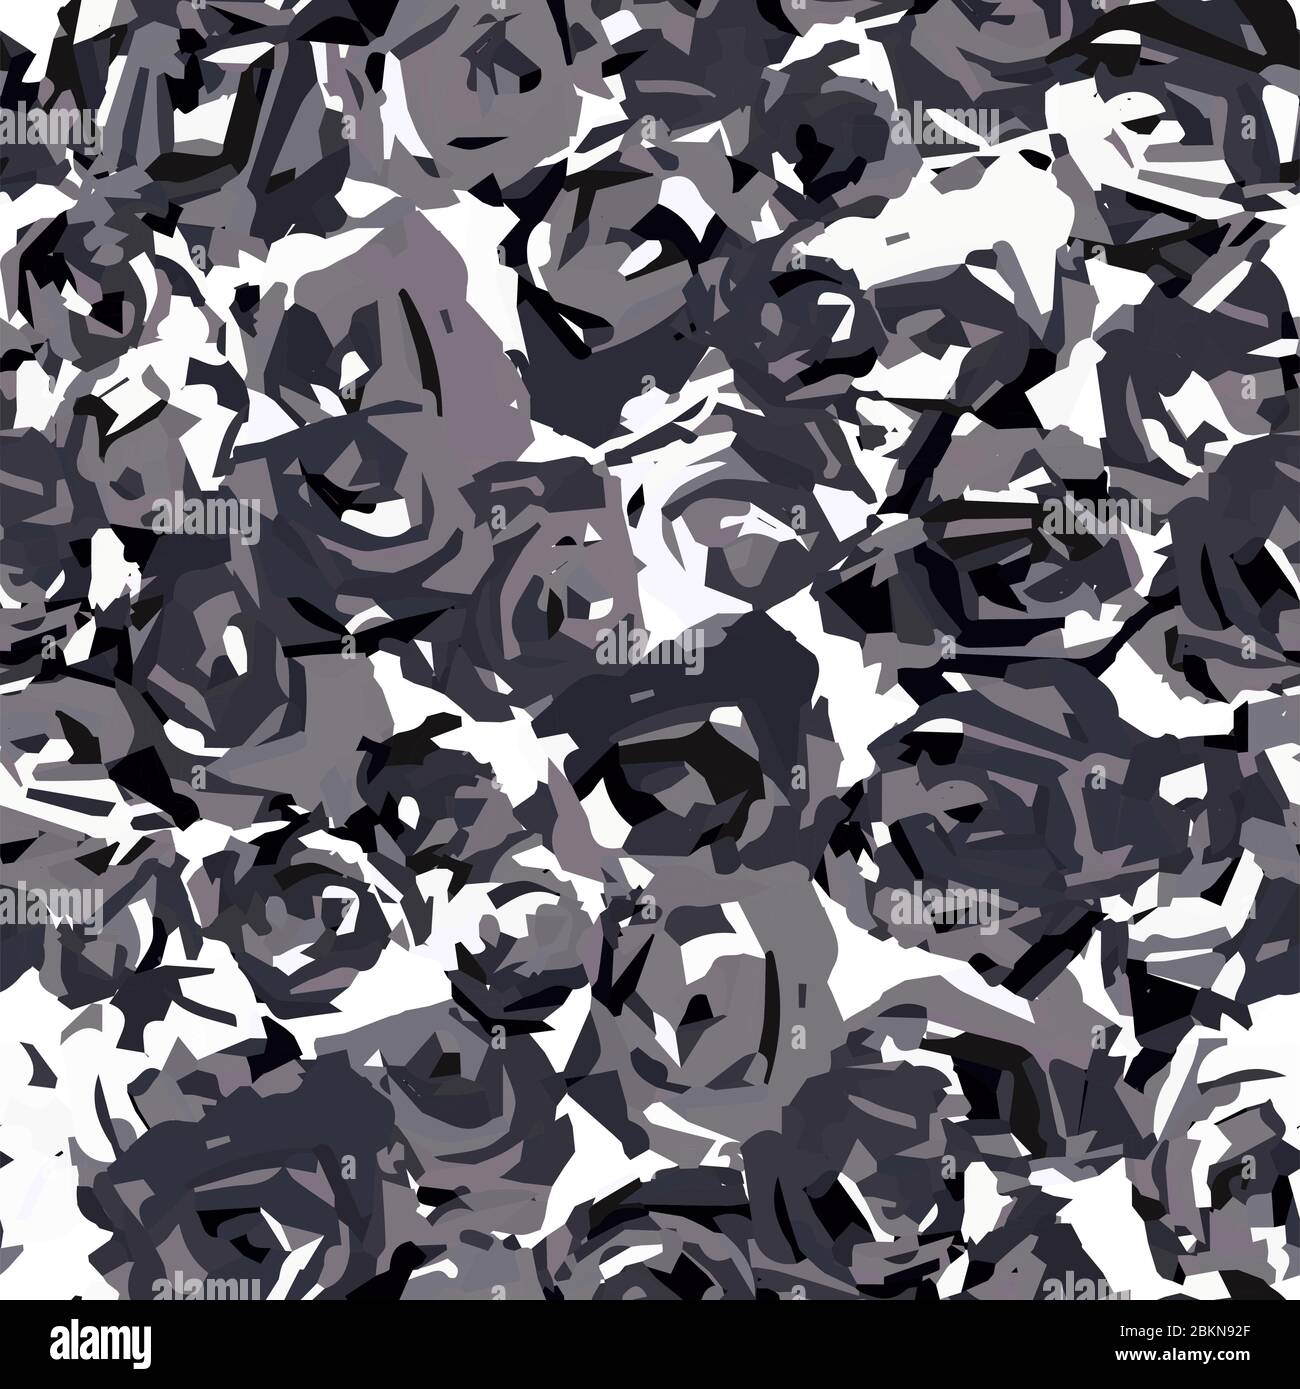  Seamless Camo Black Gray and White Camouflage Pattern